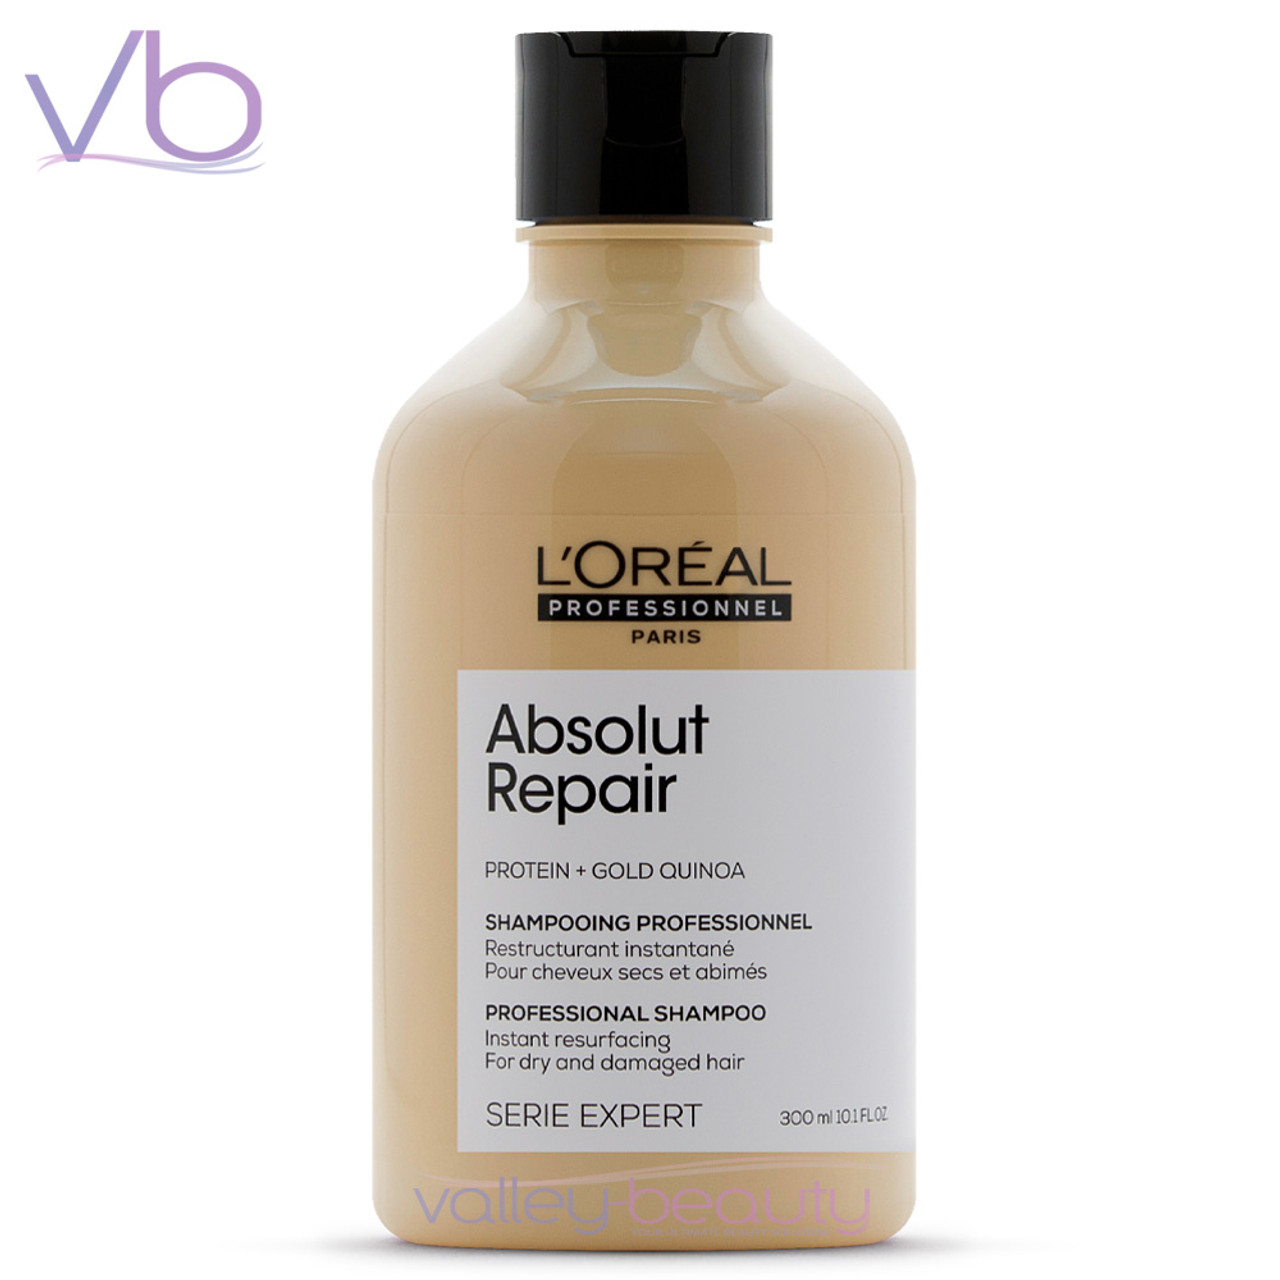 L'Oreal L’Oreal Serie Expert Absolut Repair Protein + Gold Quinoa Shampoo | Resurfacing Cleanser for Dry and Damaged Hair, 300ml